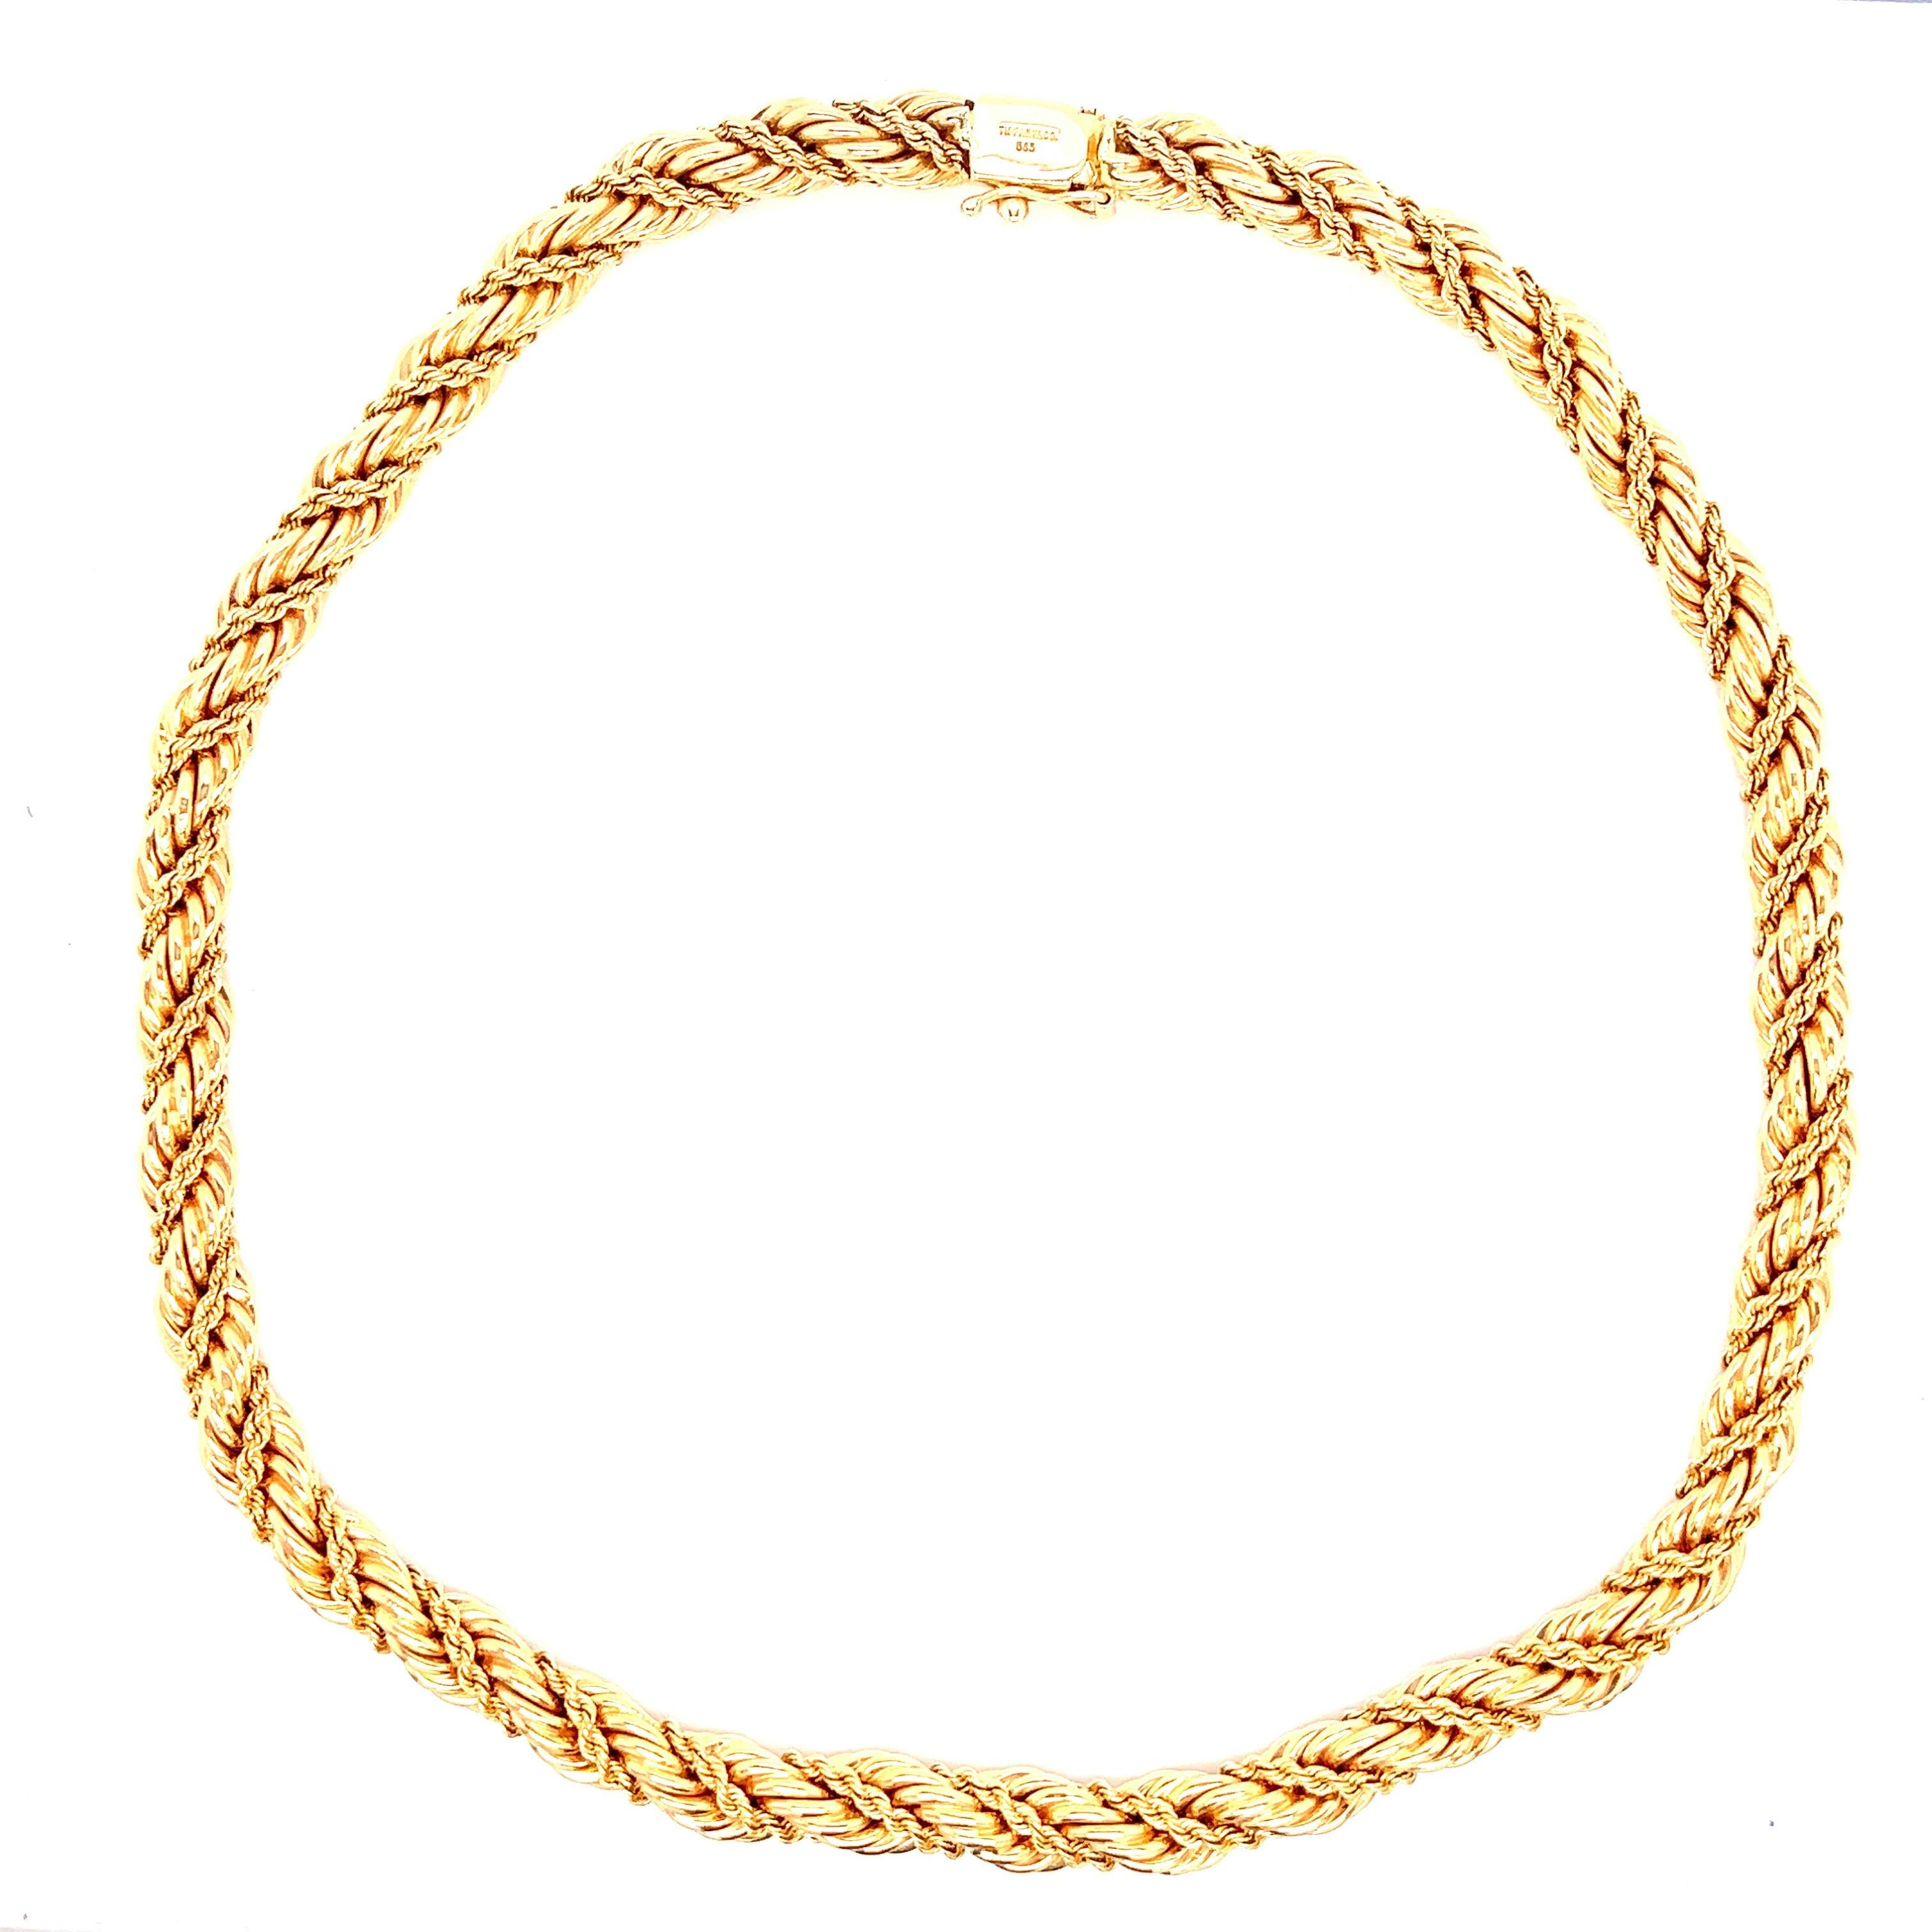 Tiffany & Co. 14 karat yellow gold necklace with twisted ropes motif. Marked: Tiffany & Co. / 585. Total weight: 57.1 grams. Length: 16.5 inches. Width: 0.25 inch.